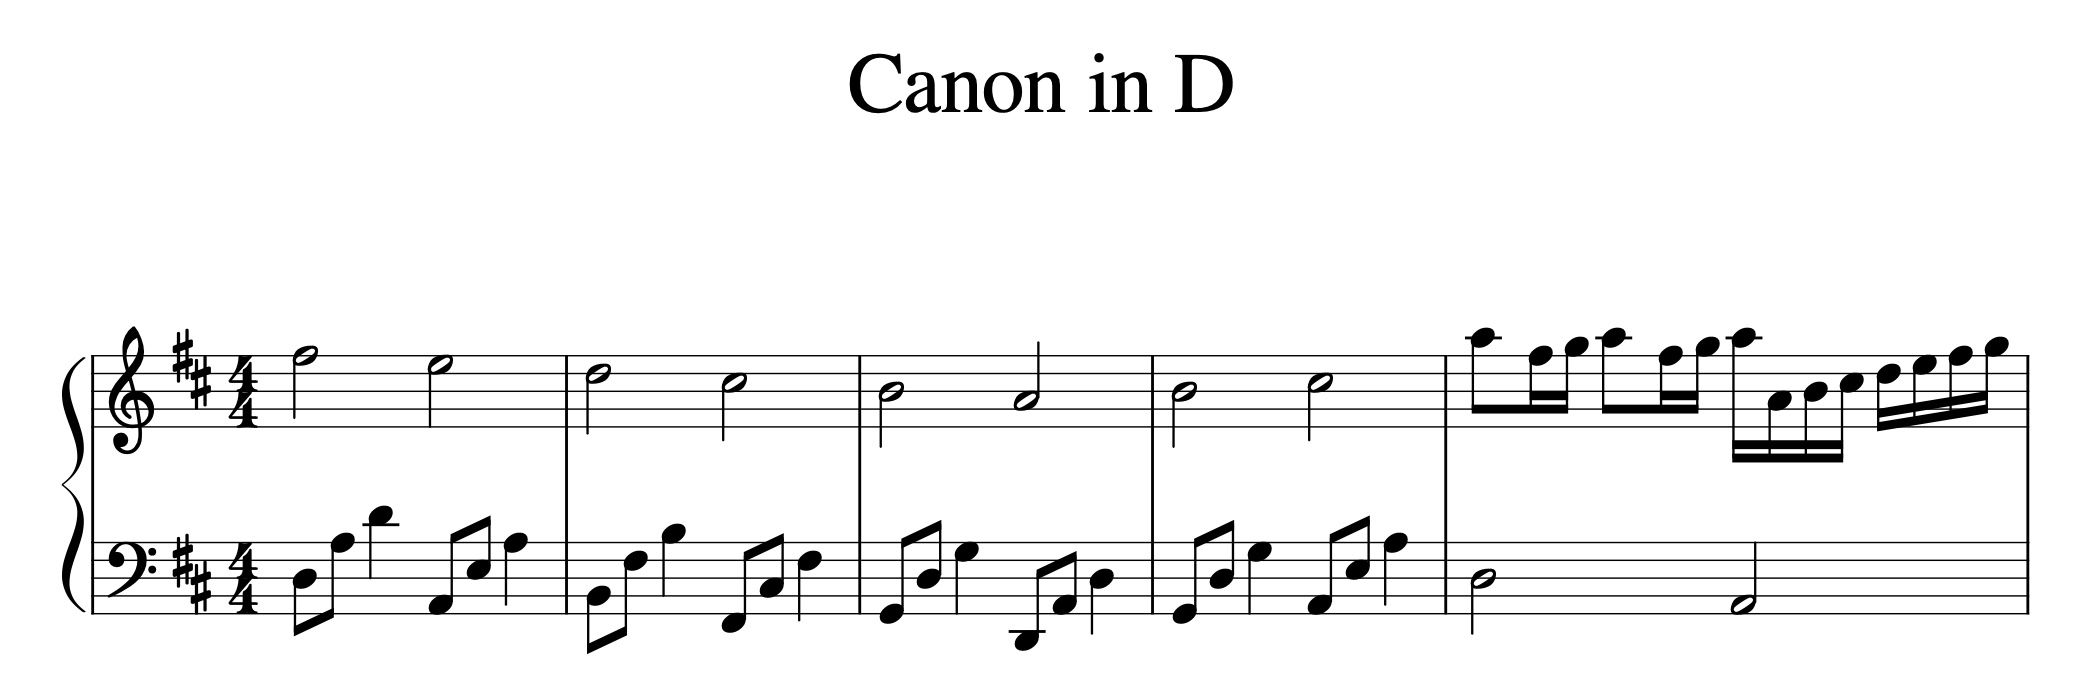 Canon in D Piano Easy Sheet